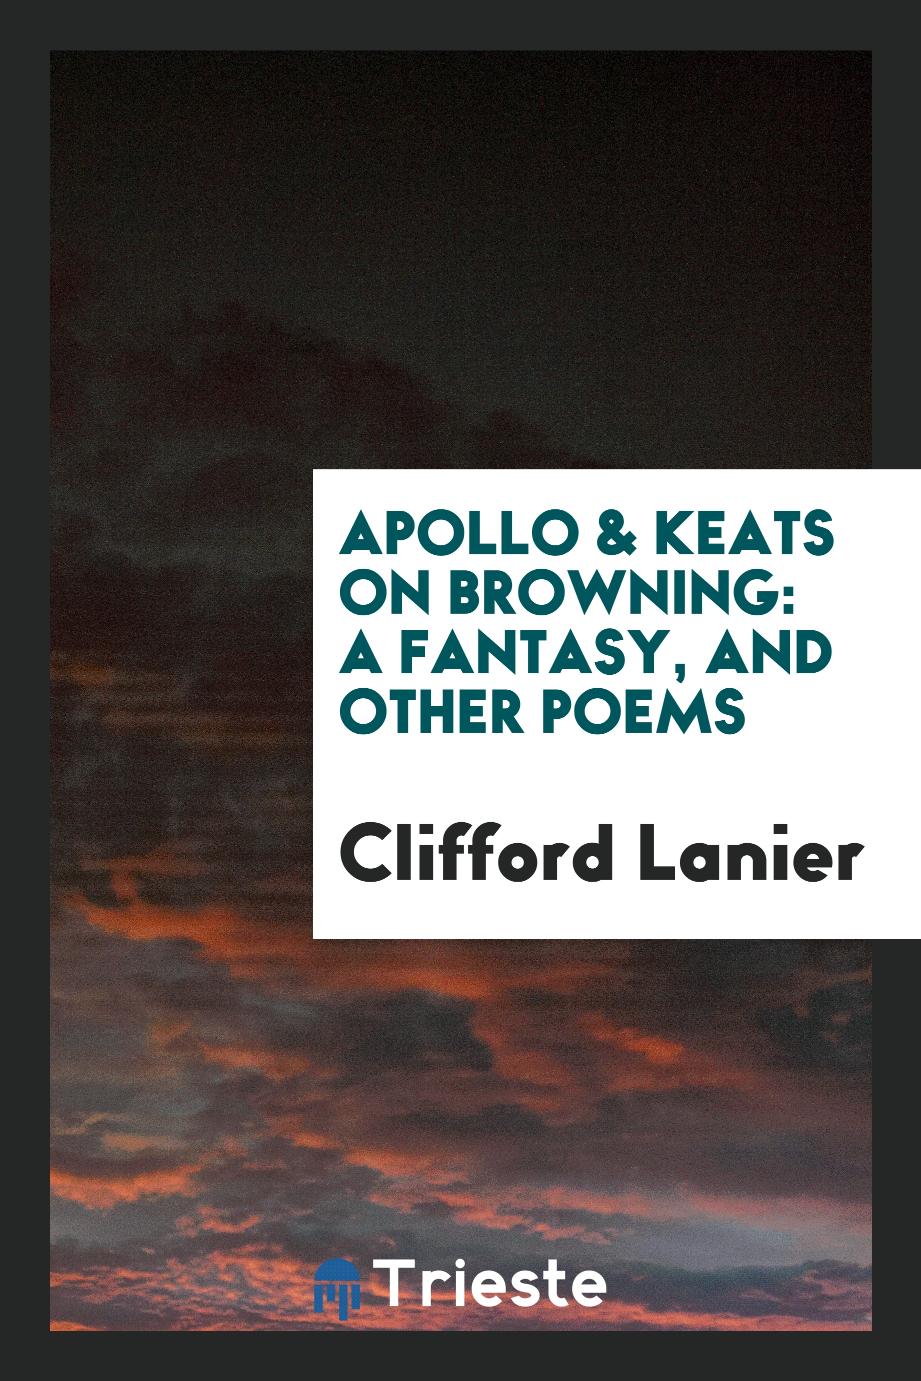 Apollo & Keats on Browning: A Fantasy, and Other Poems